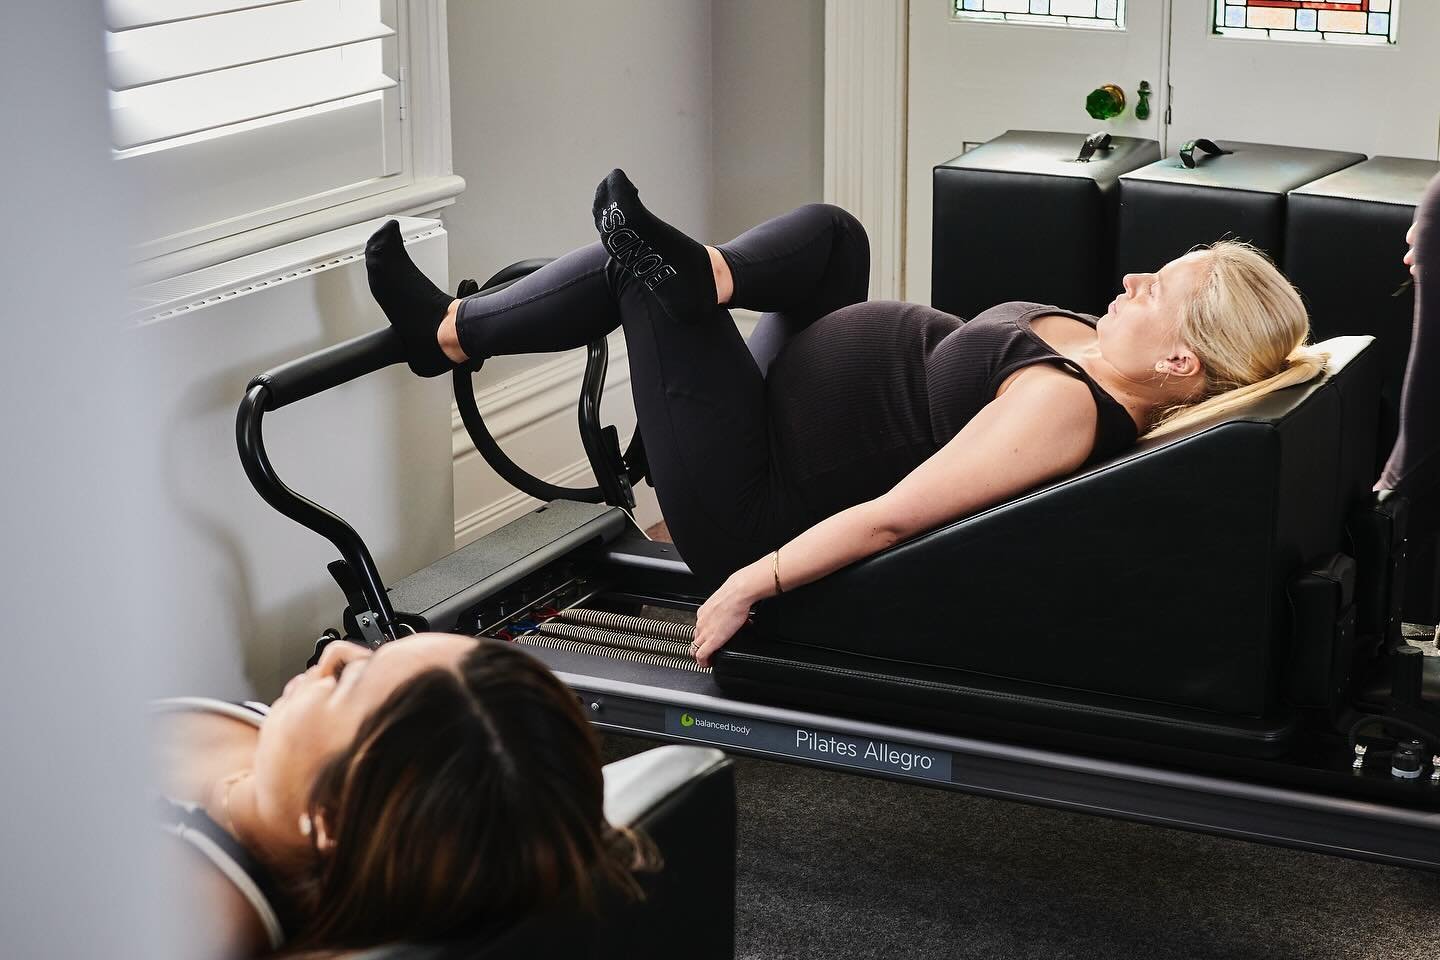 Prenatal pilates classes are the perfect way to stay active throughout every stage of your pregnancy! 🤩

Our pilates instructors are allied health professionals themselves with additional training in pelvic health that allows them to tailor classes 